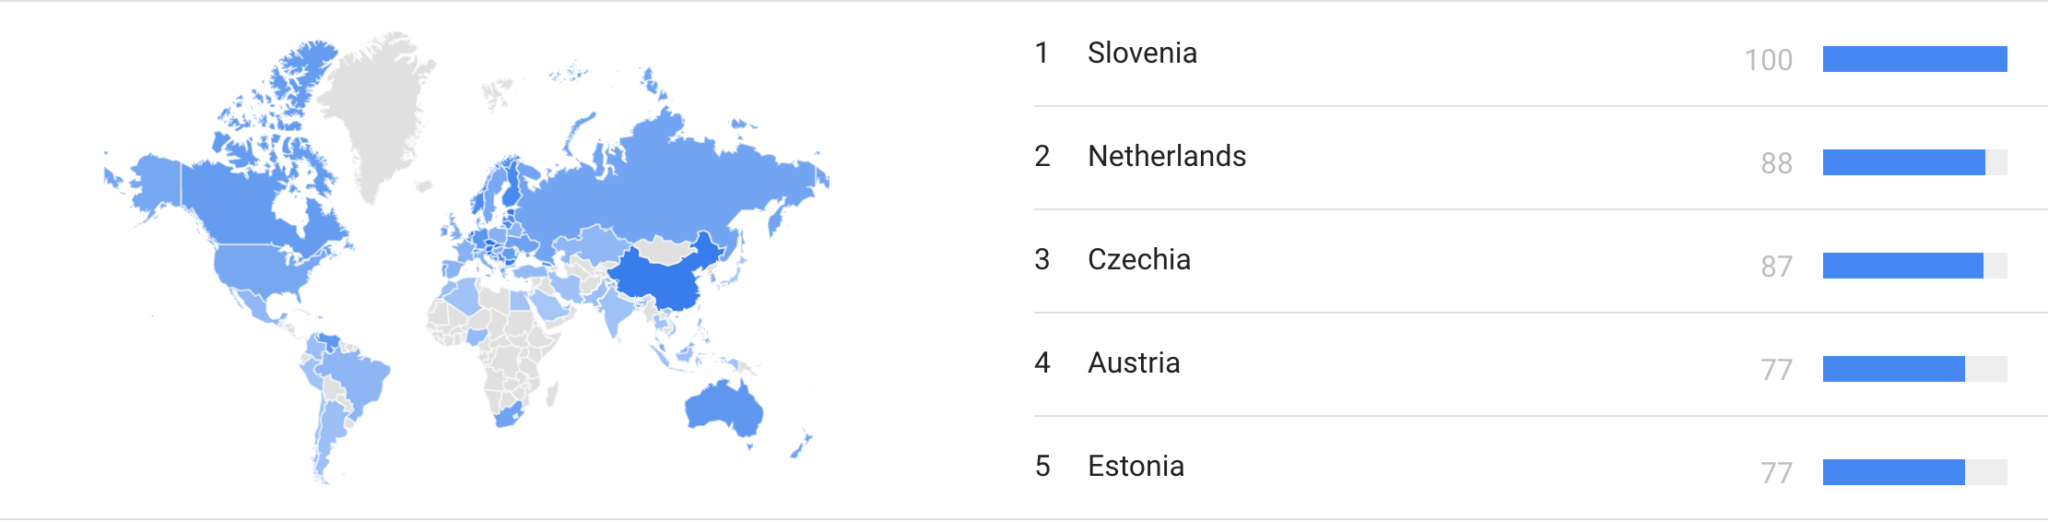 CRYPTONEWSBYTES.COM Screen-Shot-2017-12-29-at-5.36.11-PM "Bitcoin" Search team On Google Trends Map - Top 5 Countries of 2017  